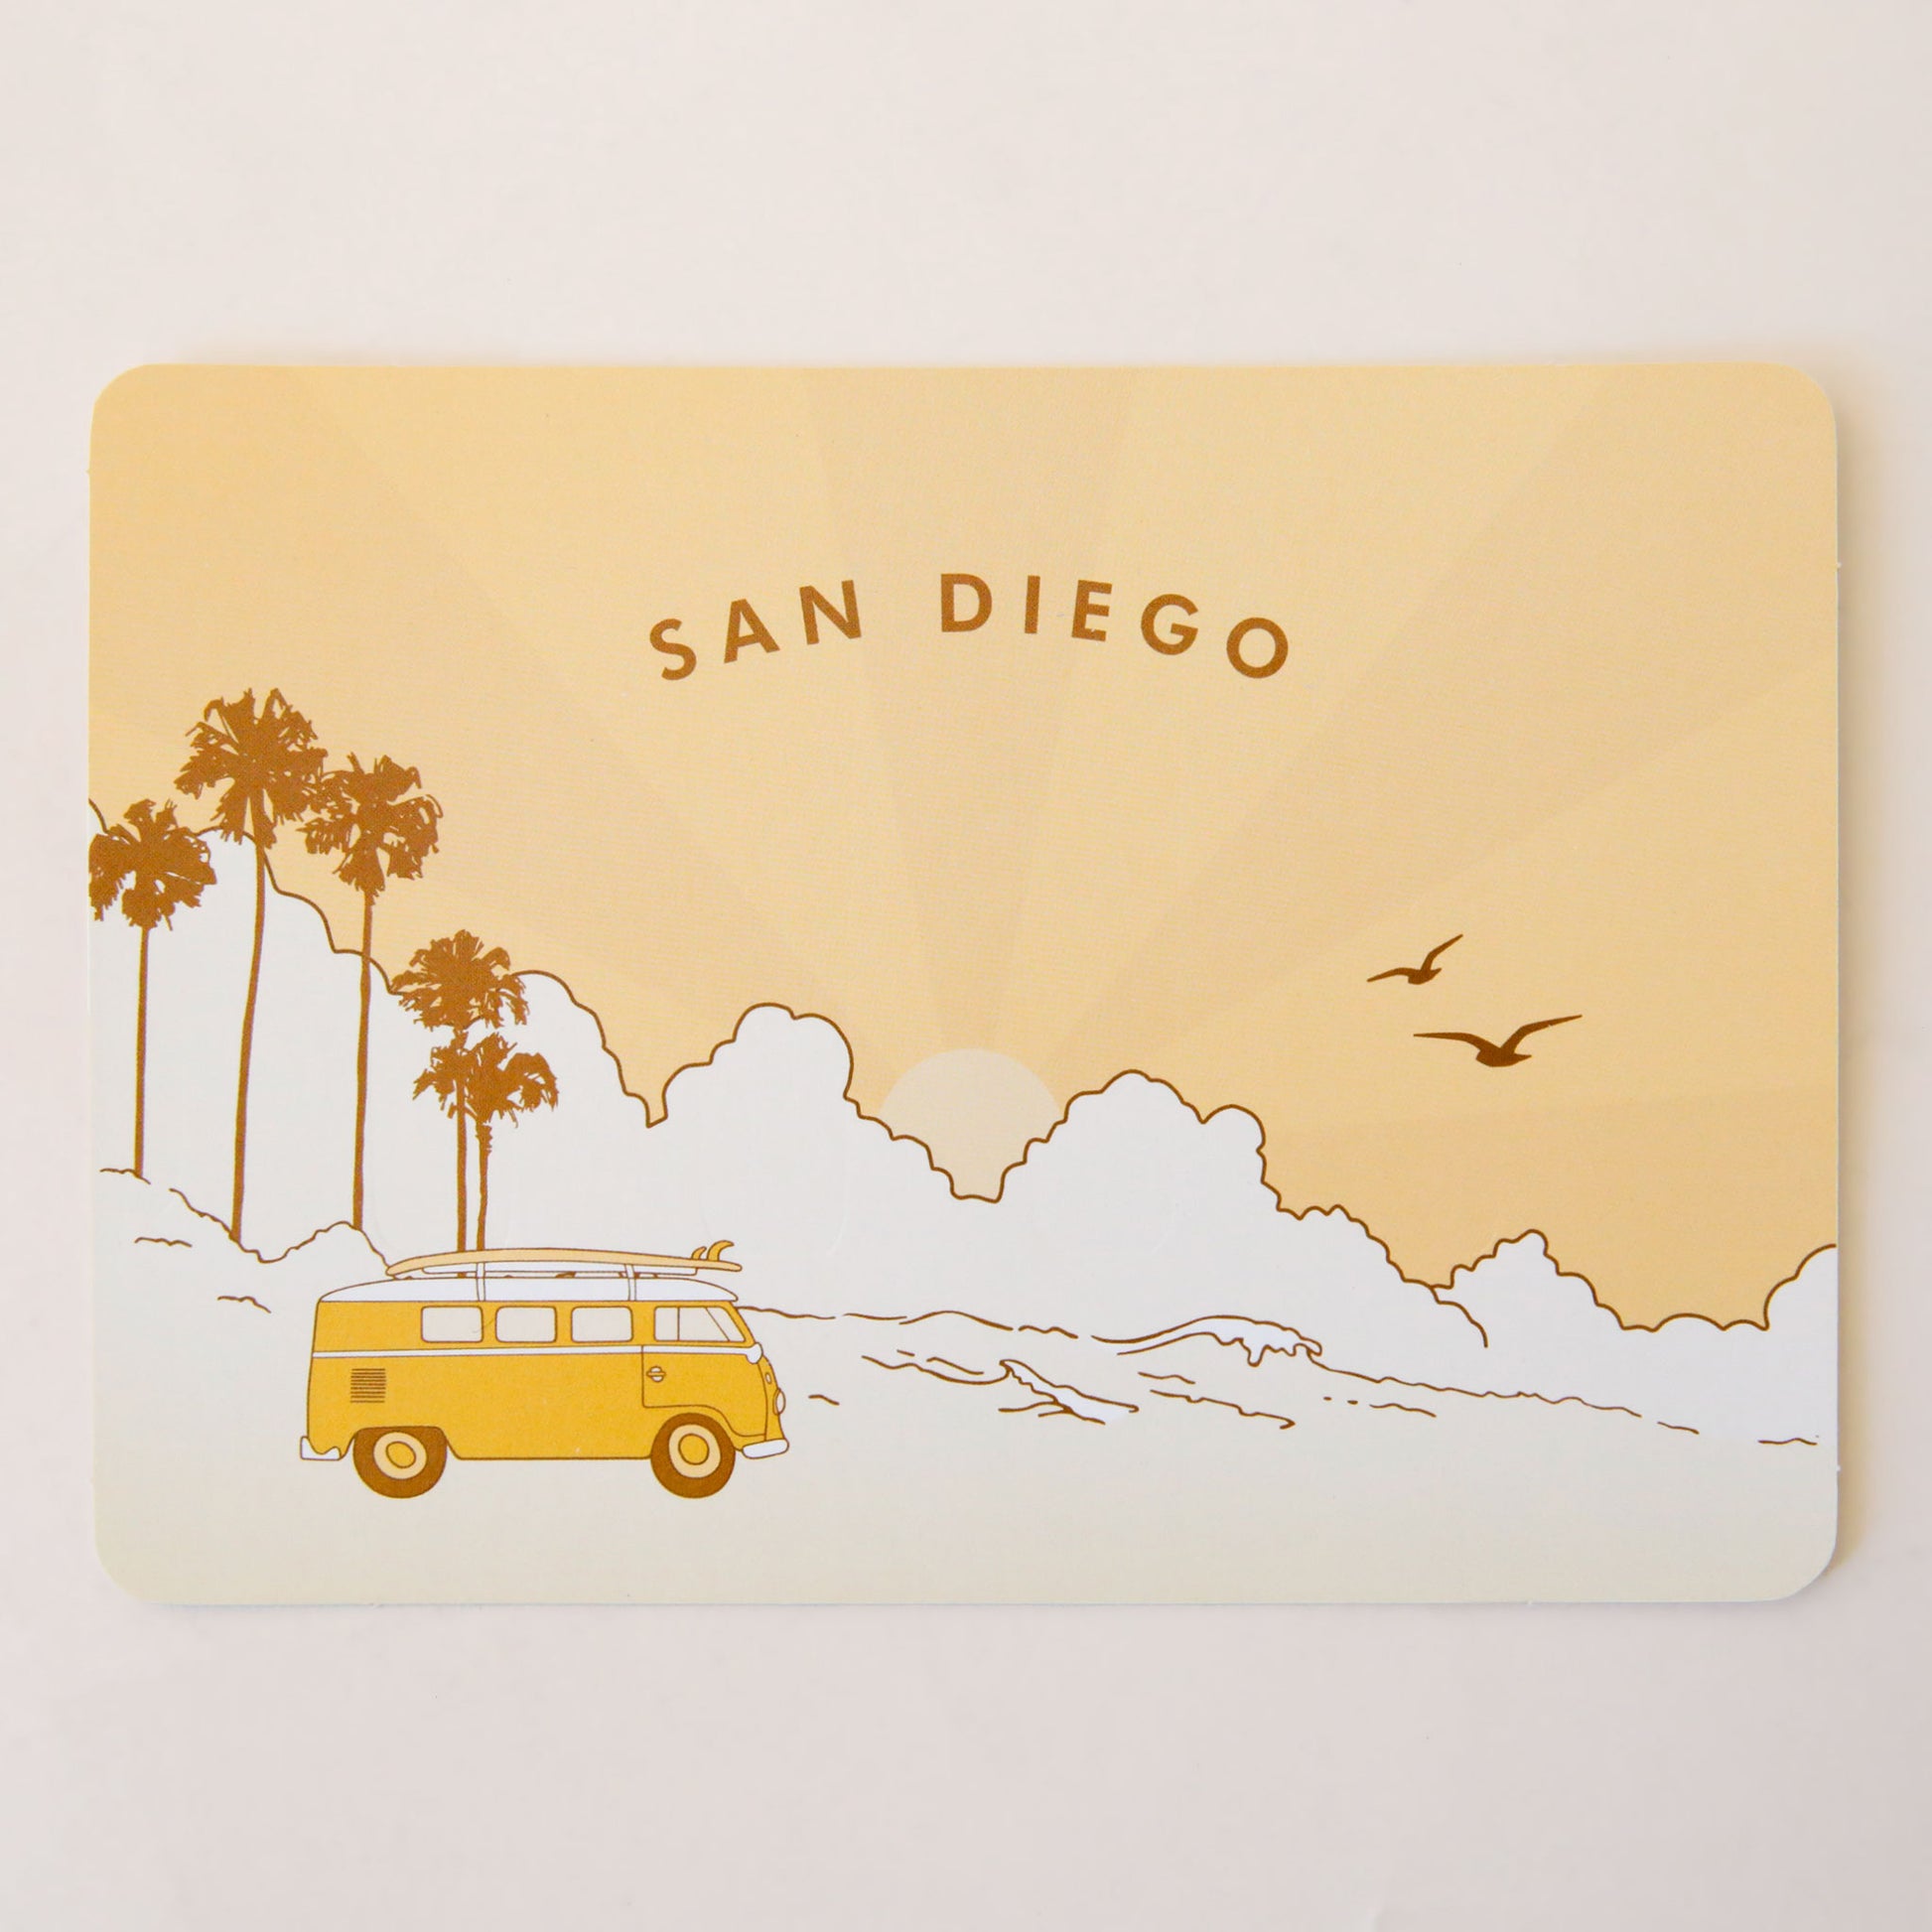 A peach postcard with palm trees and a VW bus with surfboards on the top of it. The text says, "San Diego".